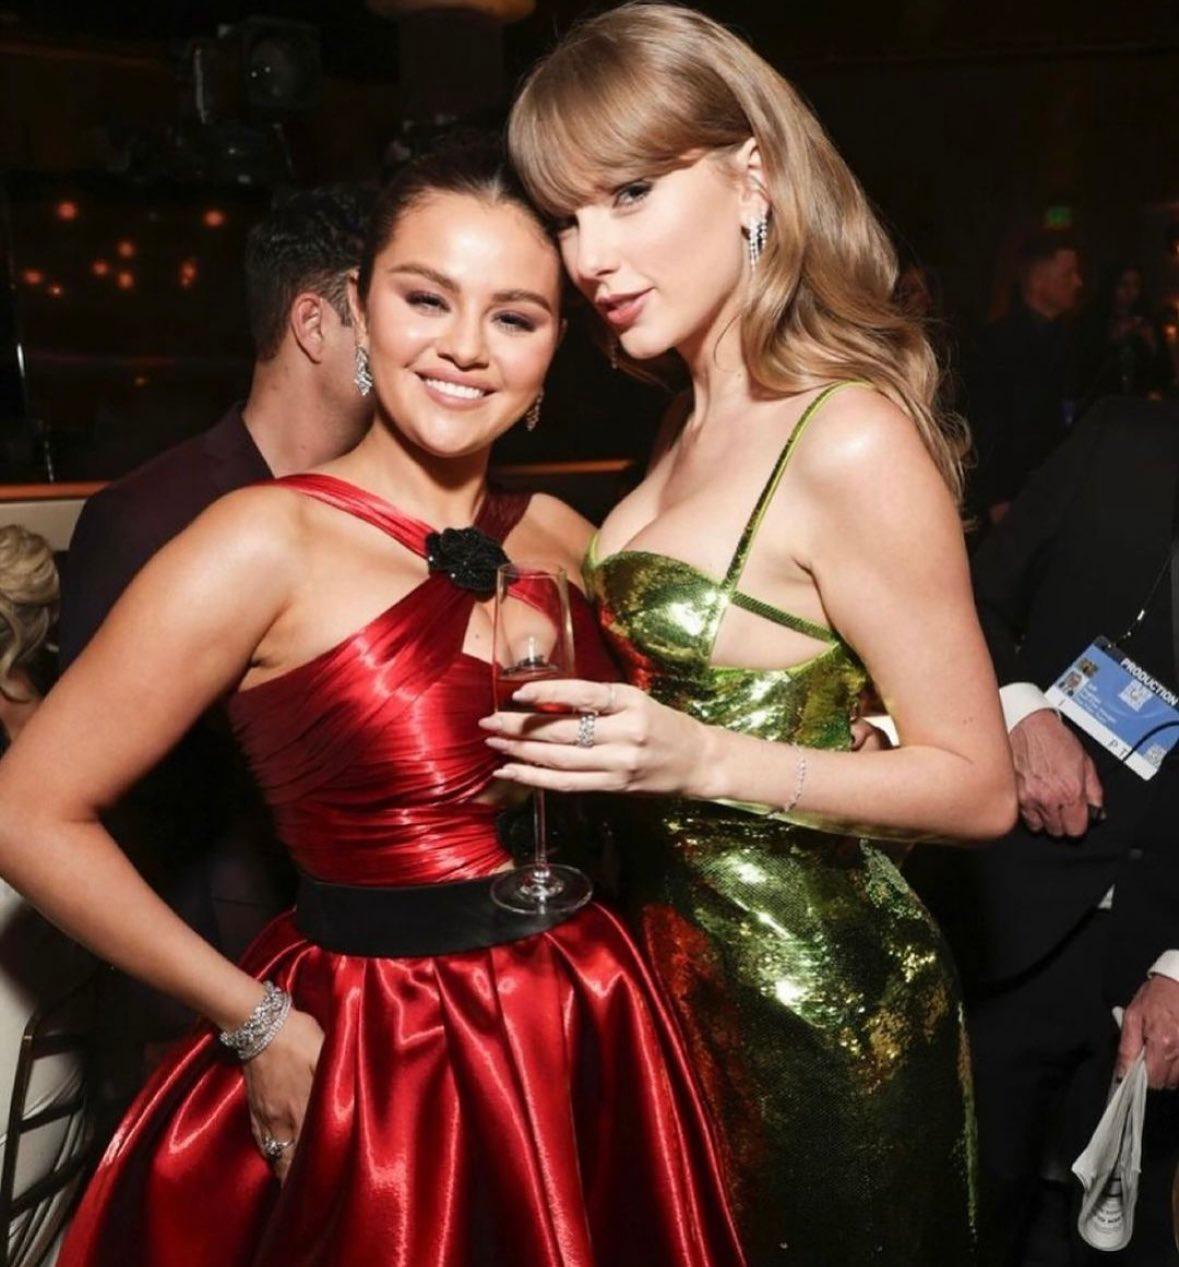 BFFs Taylor Swift and Selena Gomez posing together is always an iconic moment